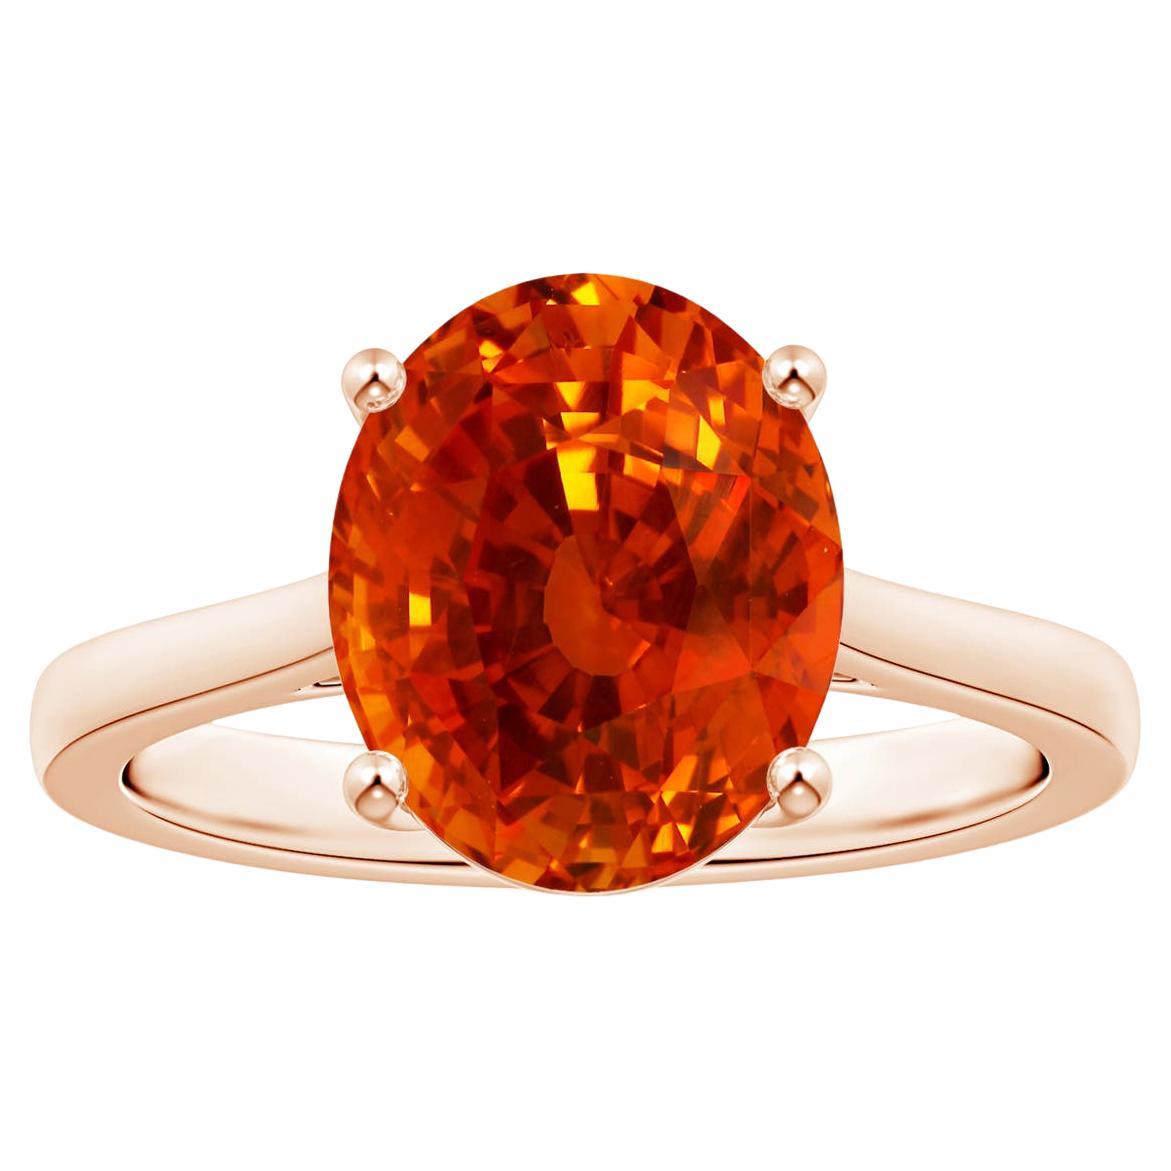 For Sale:  Angara Gia Certified Natural Orange Sapphire Solitaire Ring in Rose Gold